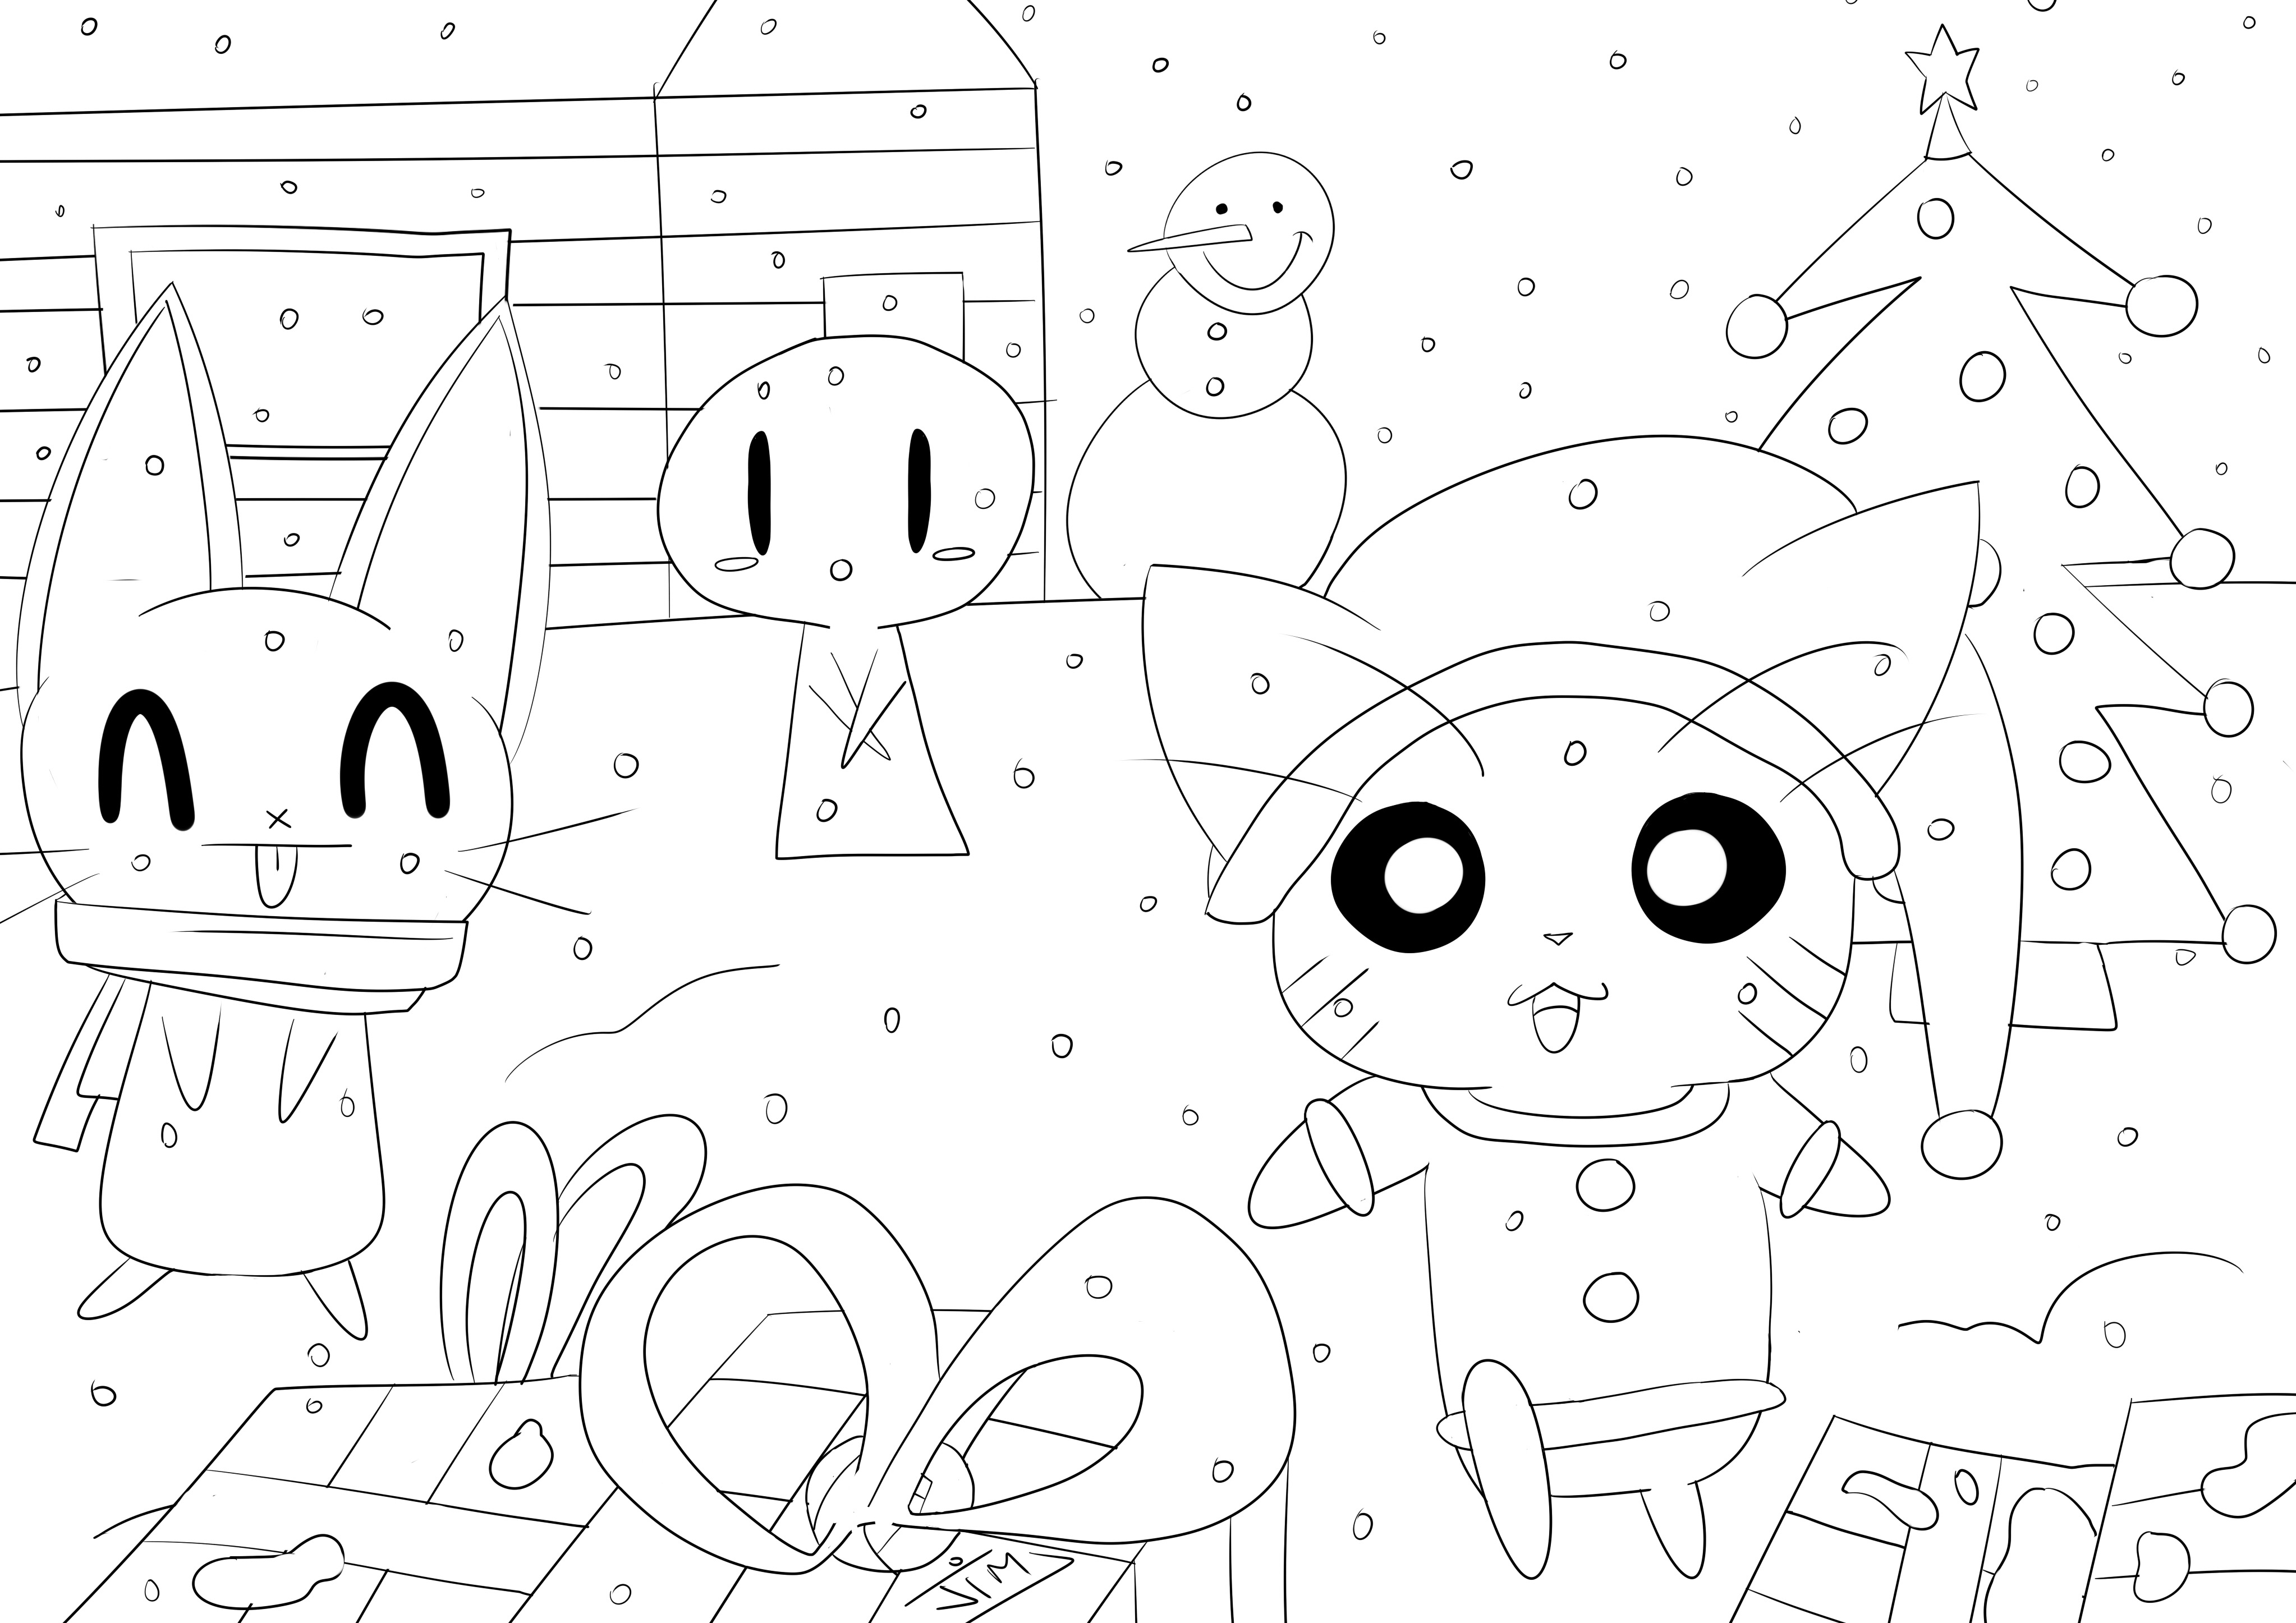 Kawaii - Coloring Pages for Adults